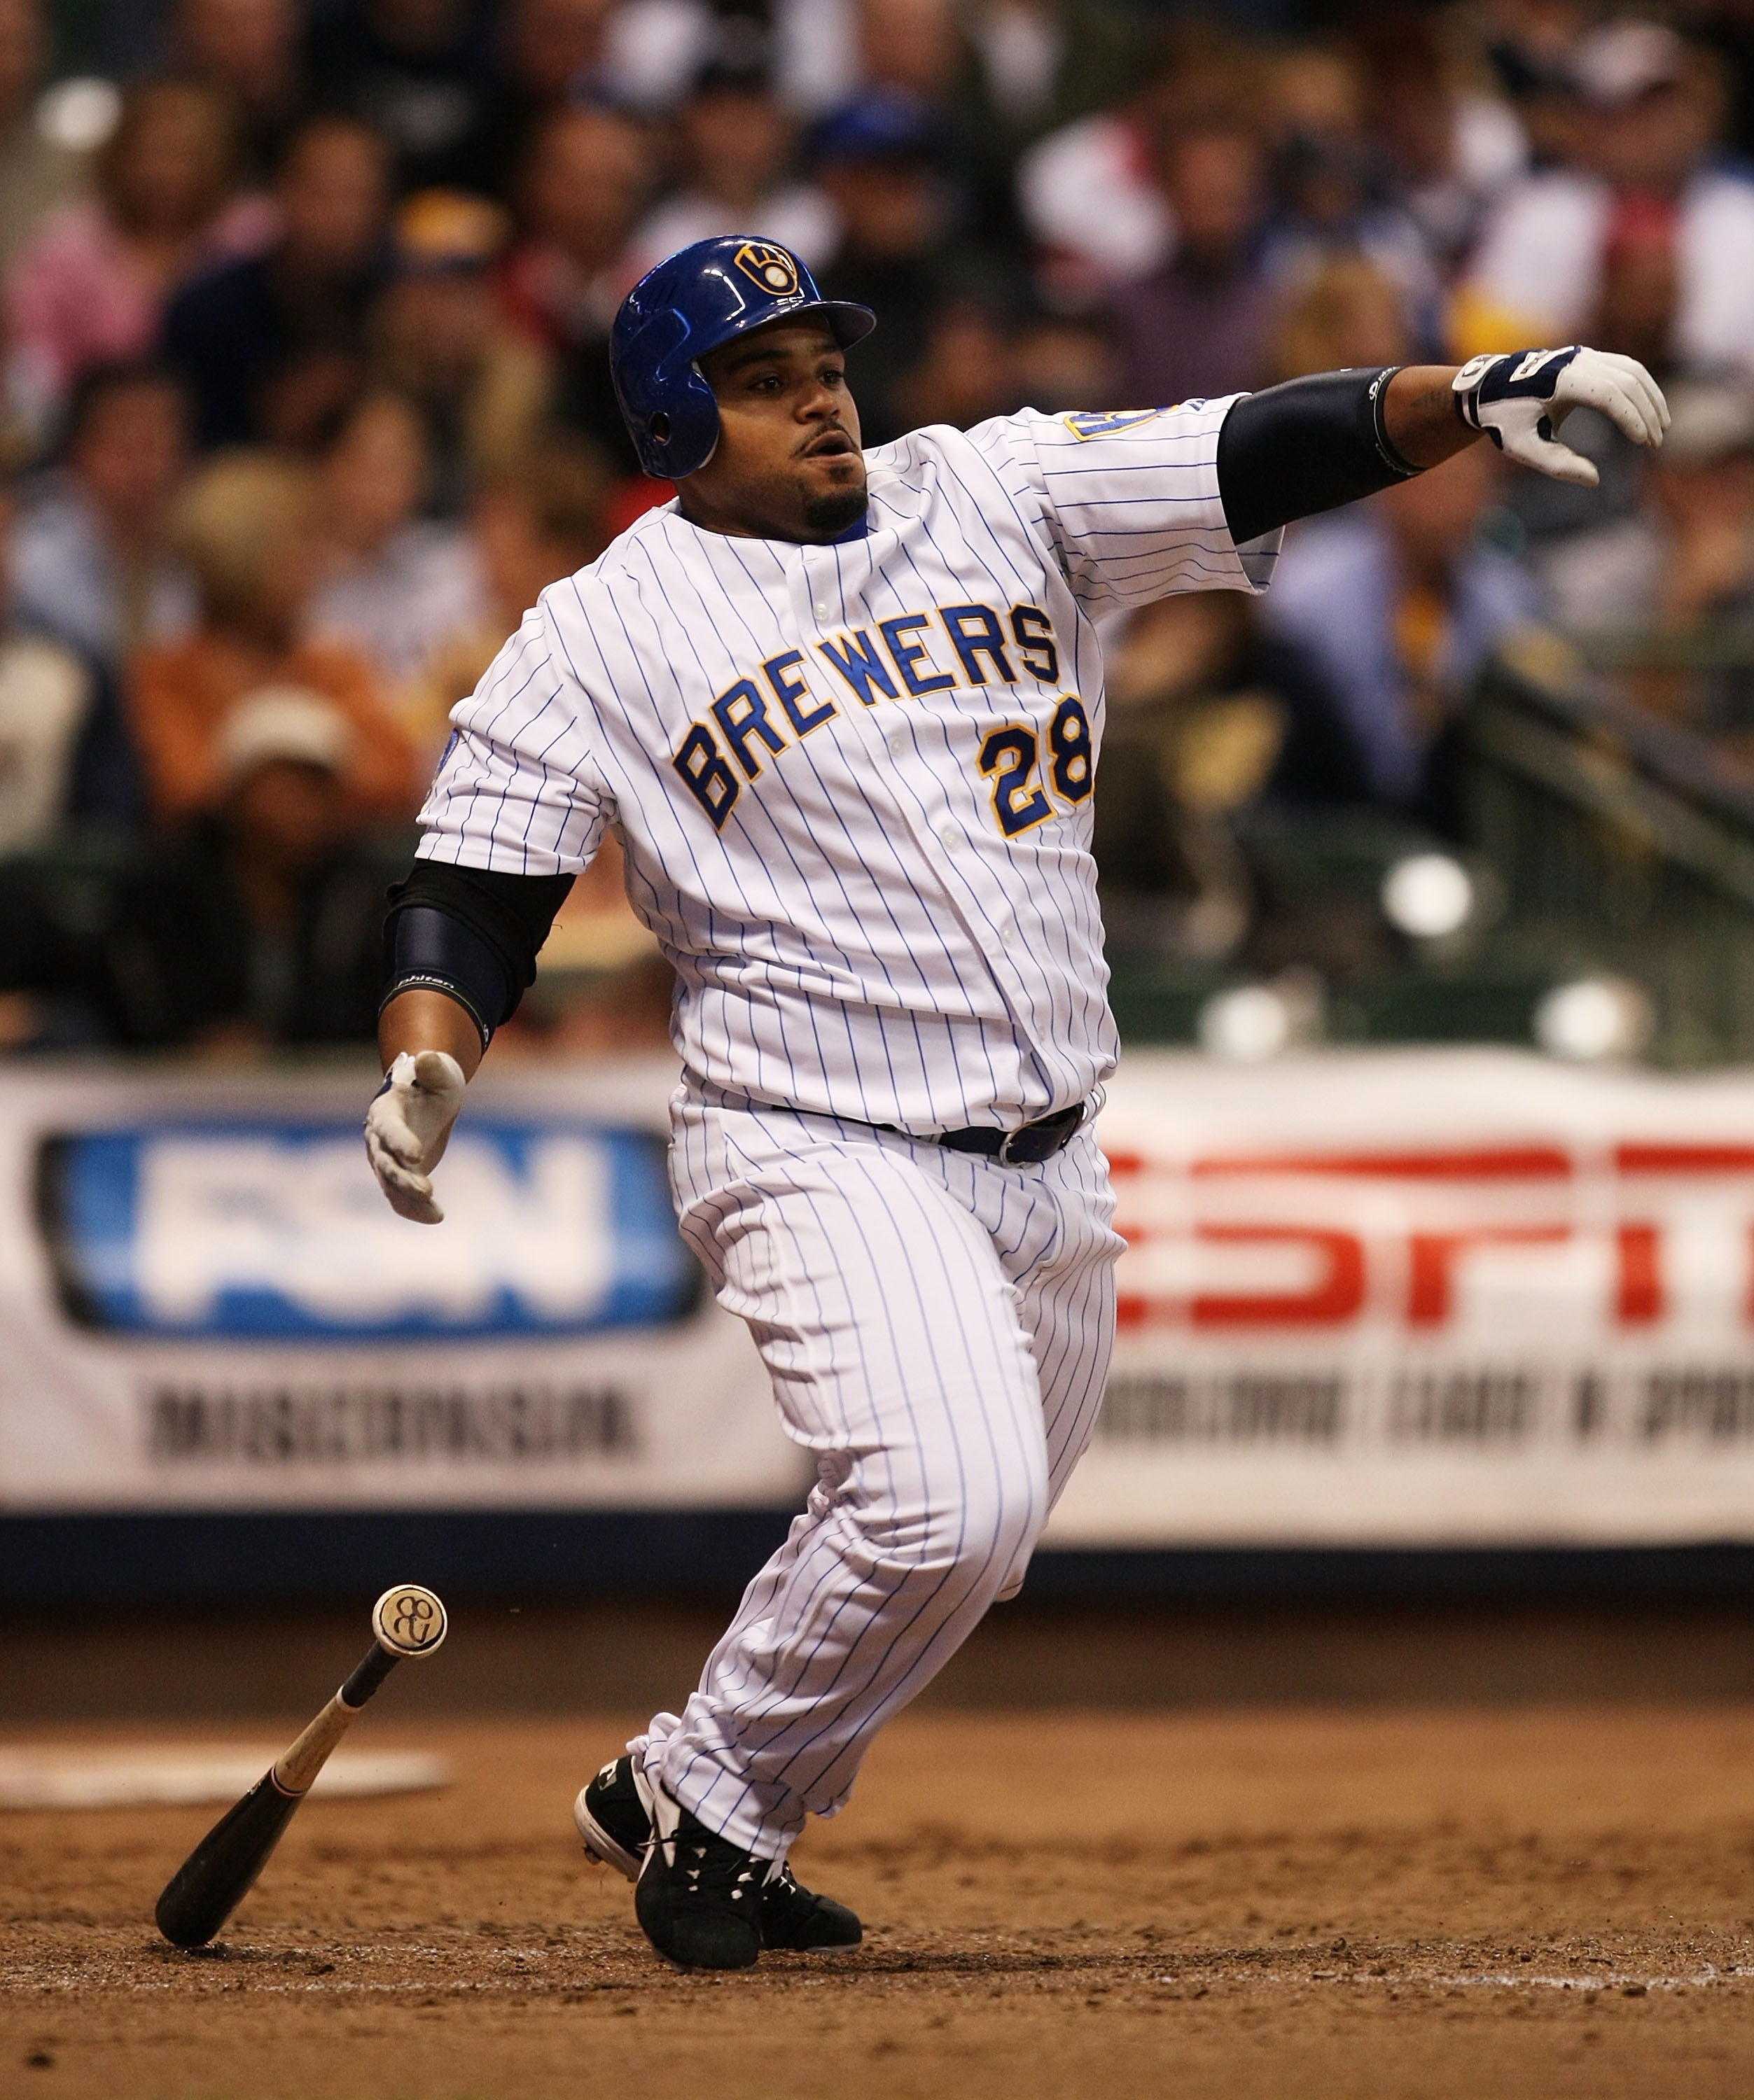 Prince Fielder outlasts Jose Bautista for Home Run title